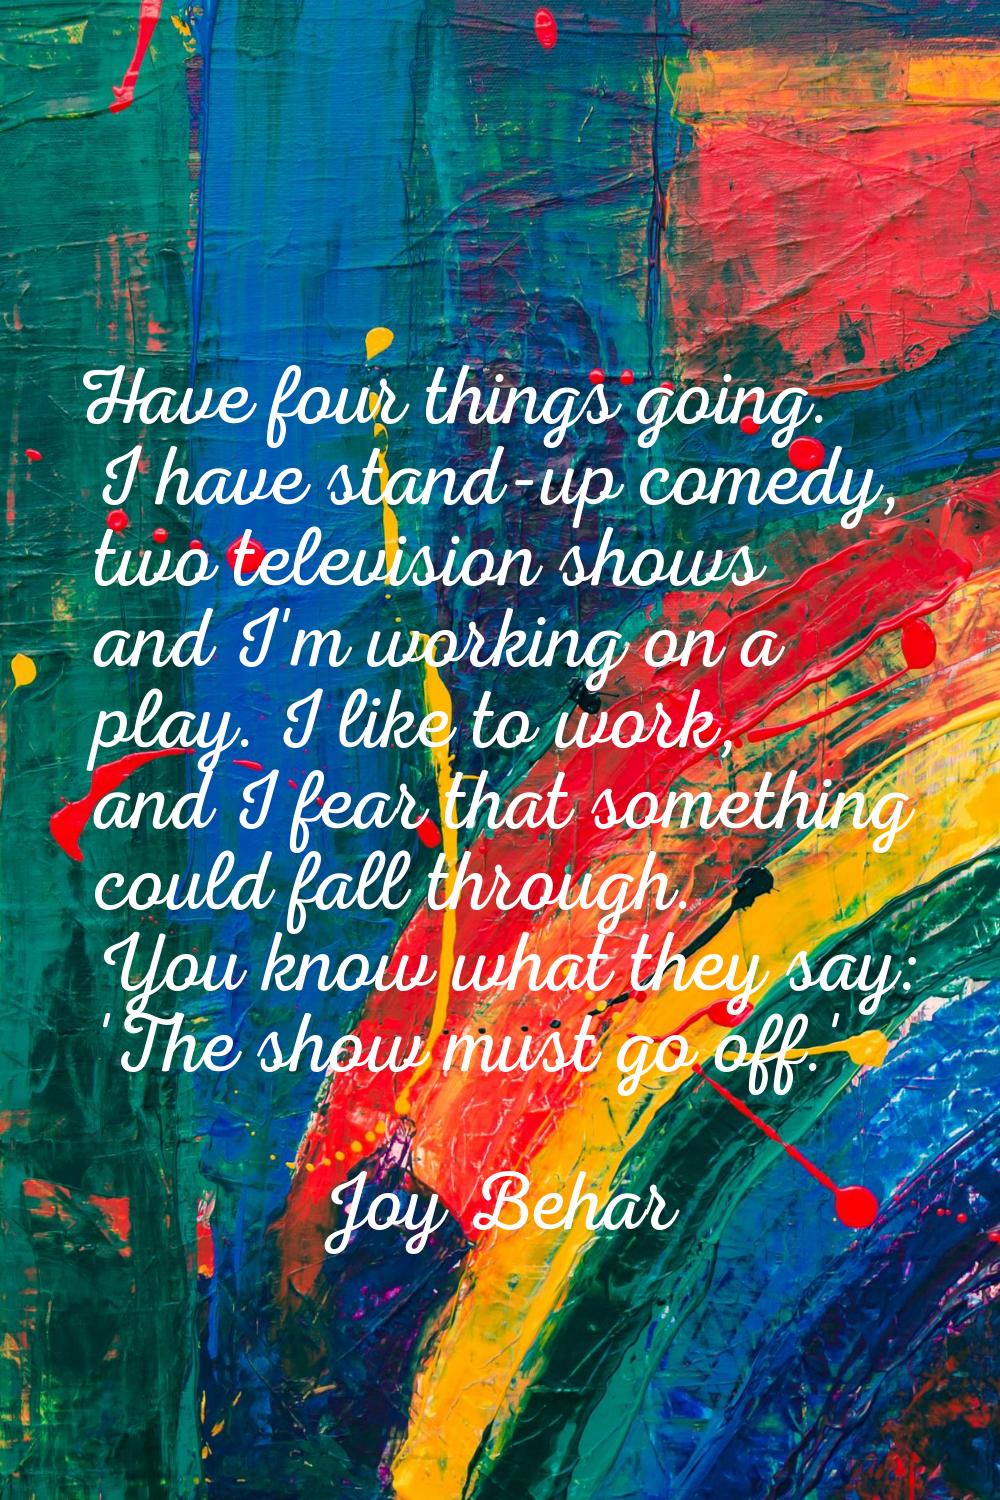 Have four things going. I have stand-up comedy, two television shows and I'm working on a play. I l